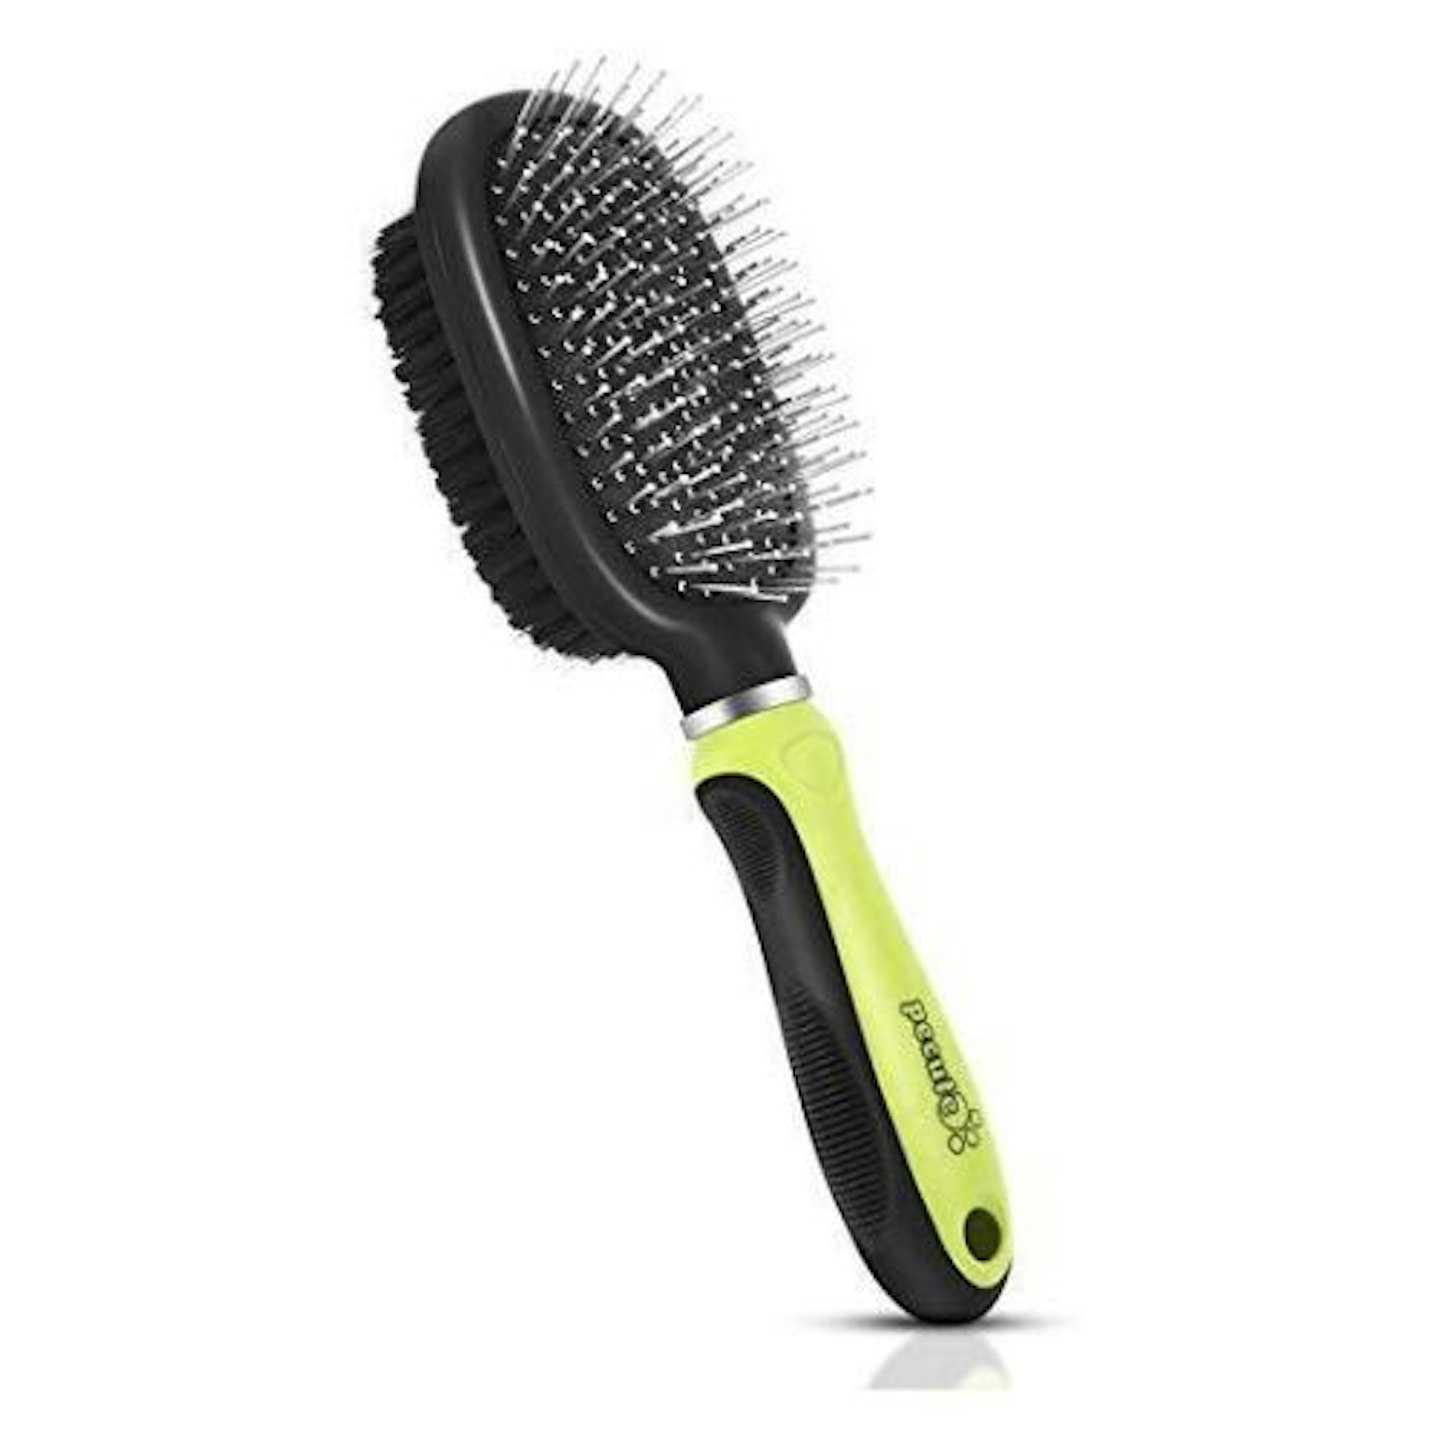 pecute Double Sided Pet Grooming Brush - 2 in 1 Pin & Bristle Soft Brush - Dail